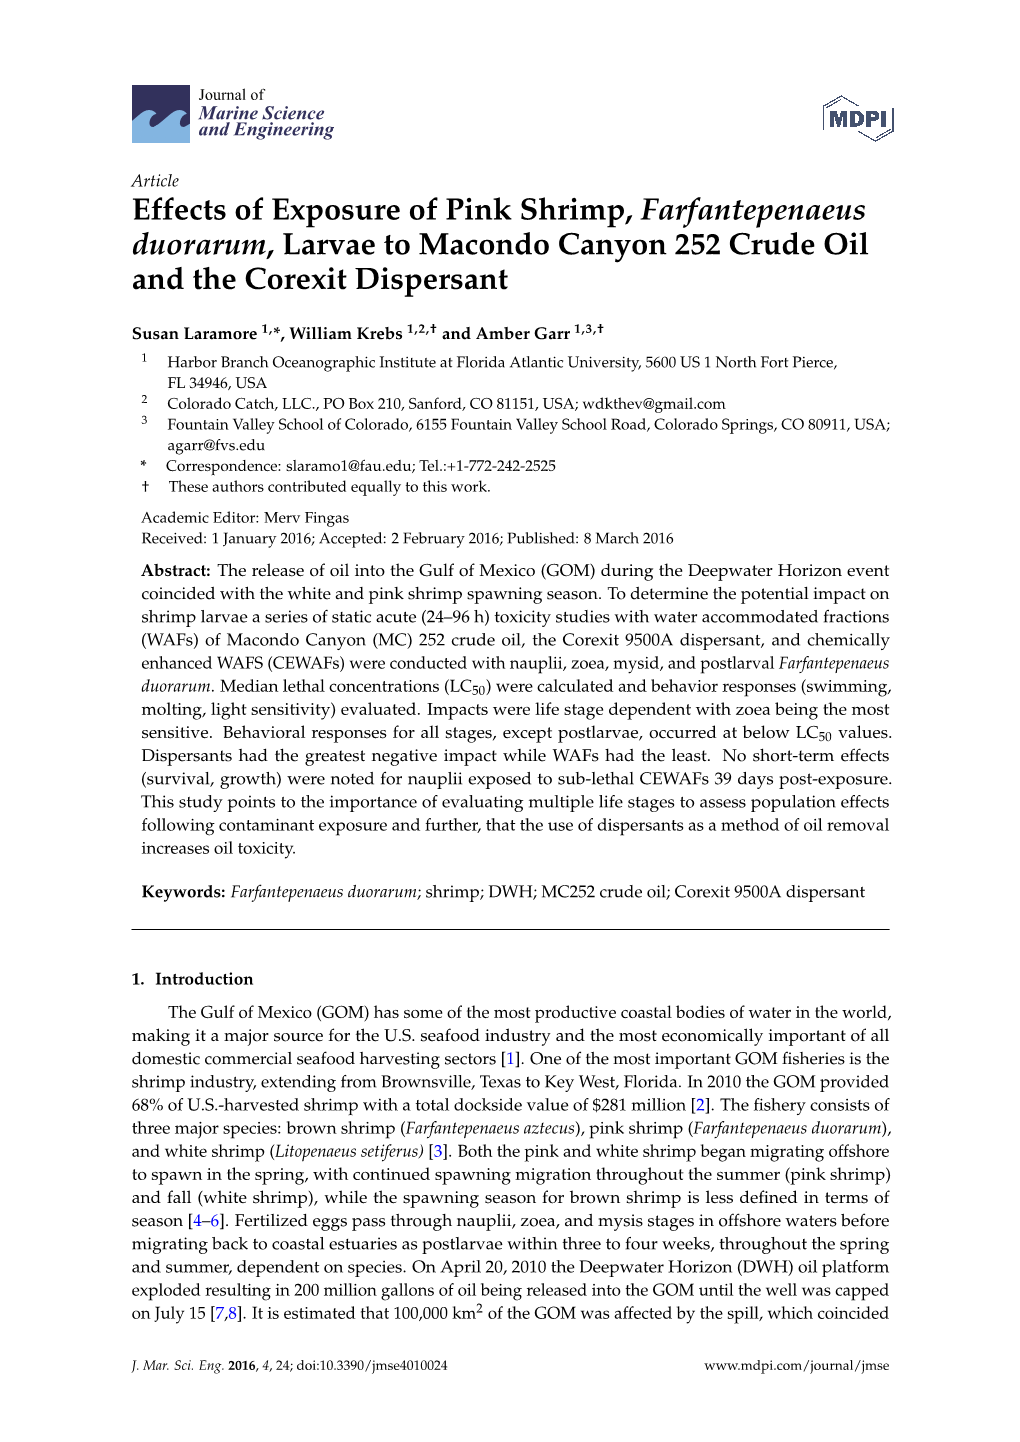 Effects of Exposure of Pink Shrimp, Farfantepenaeus Duorarum, Larvae to Macondo Canyon 252 Crude Oil and the Corexit Dispersant